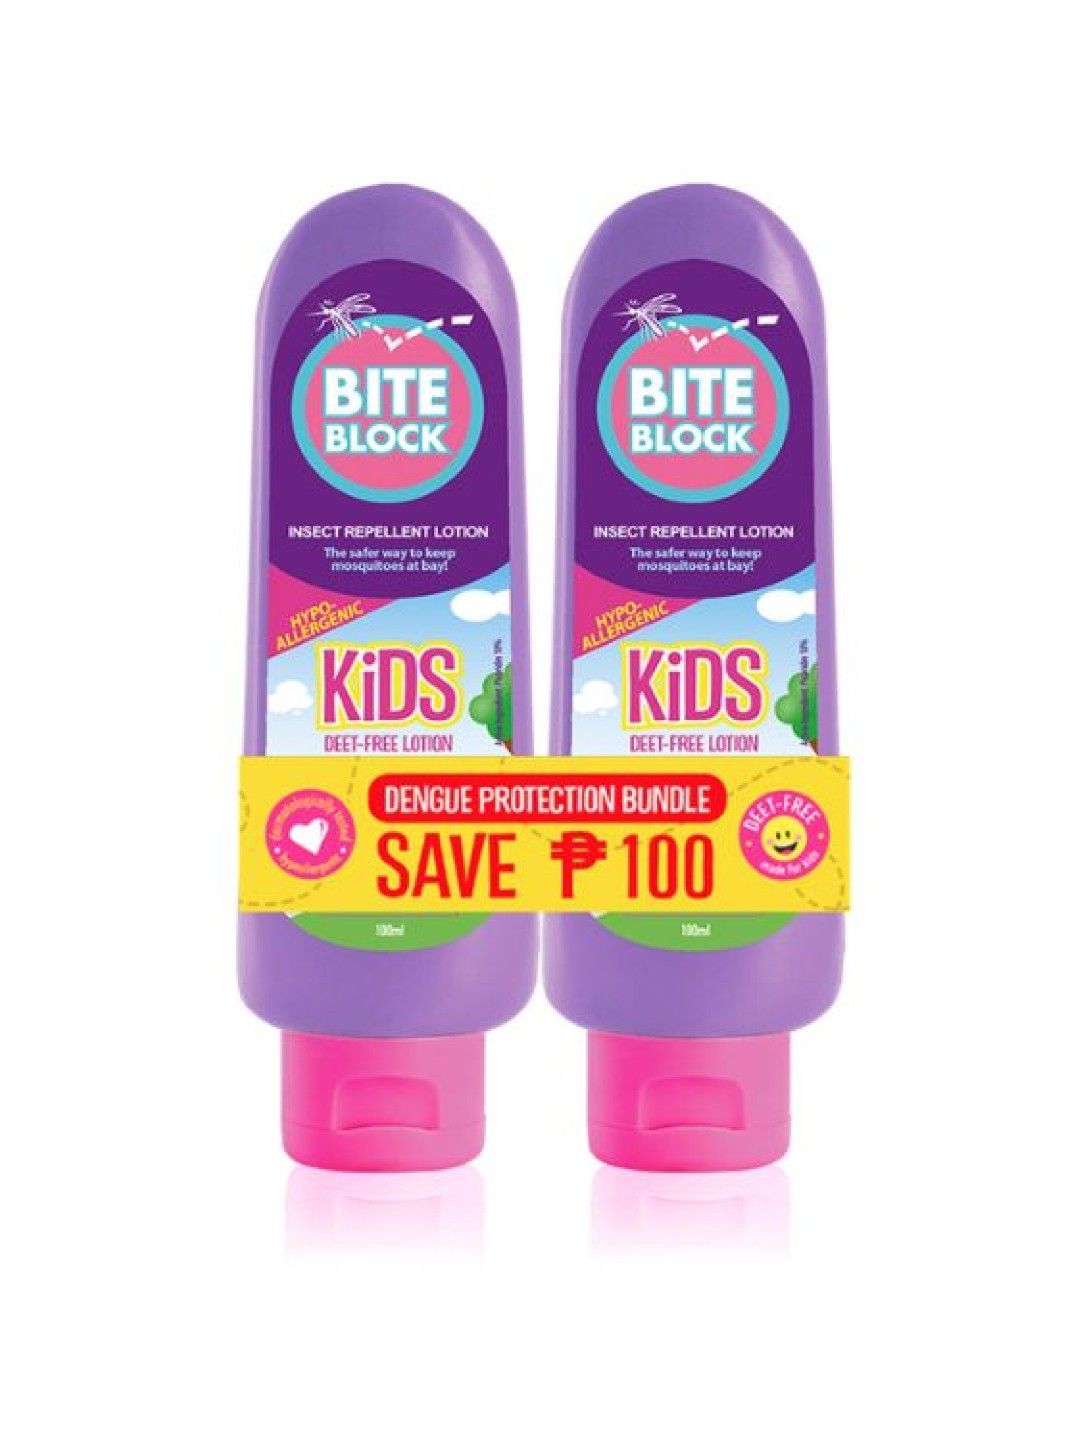 Bite Block Kids Insect Repellent Lotion (100ml) Bundle of 2